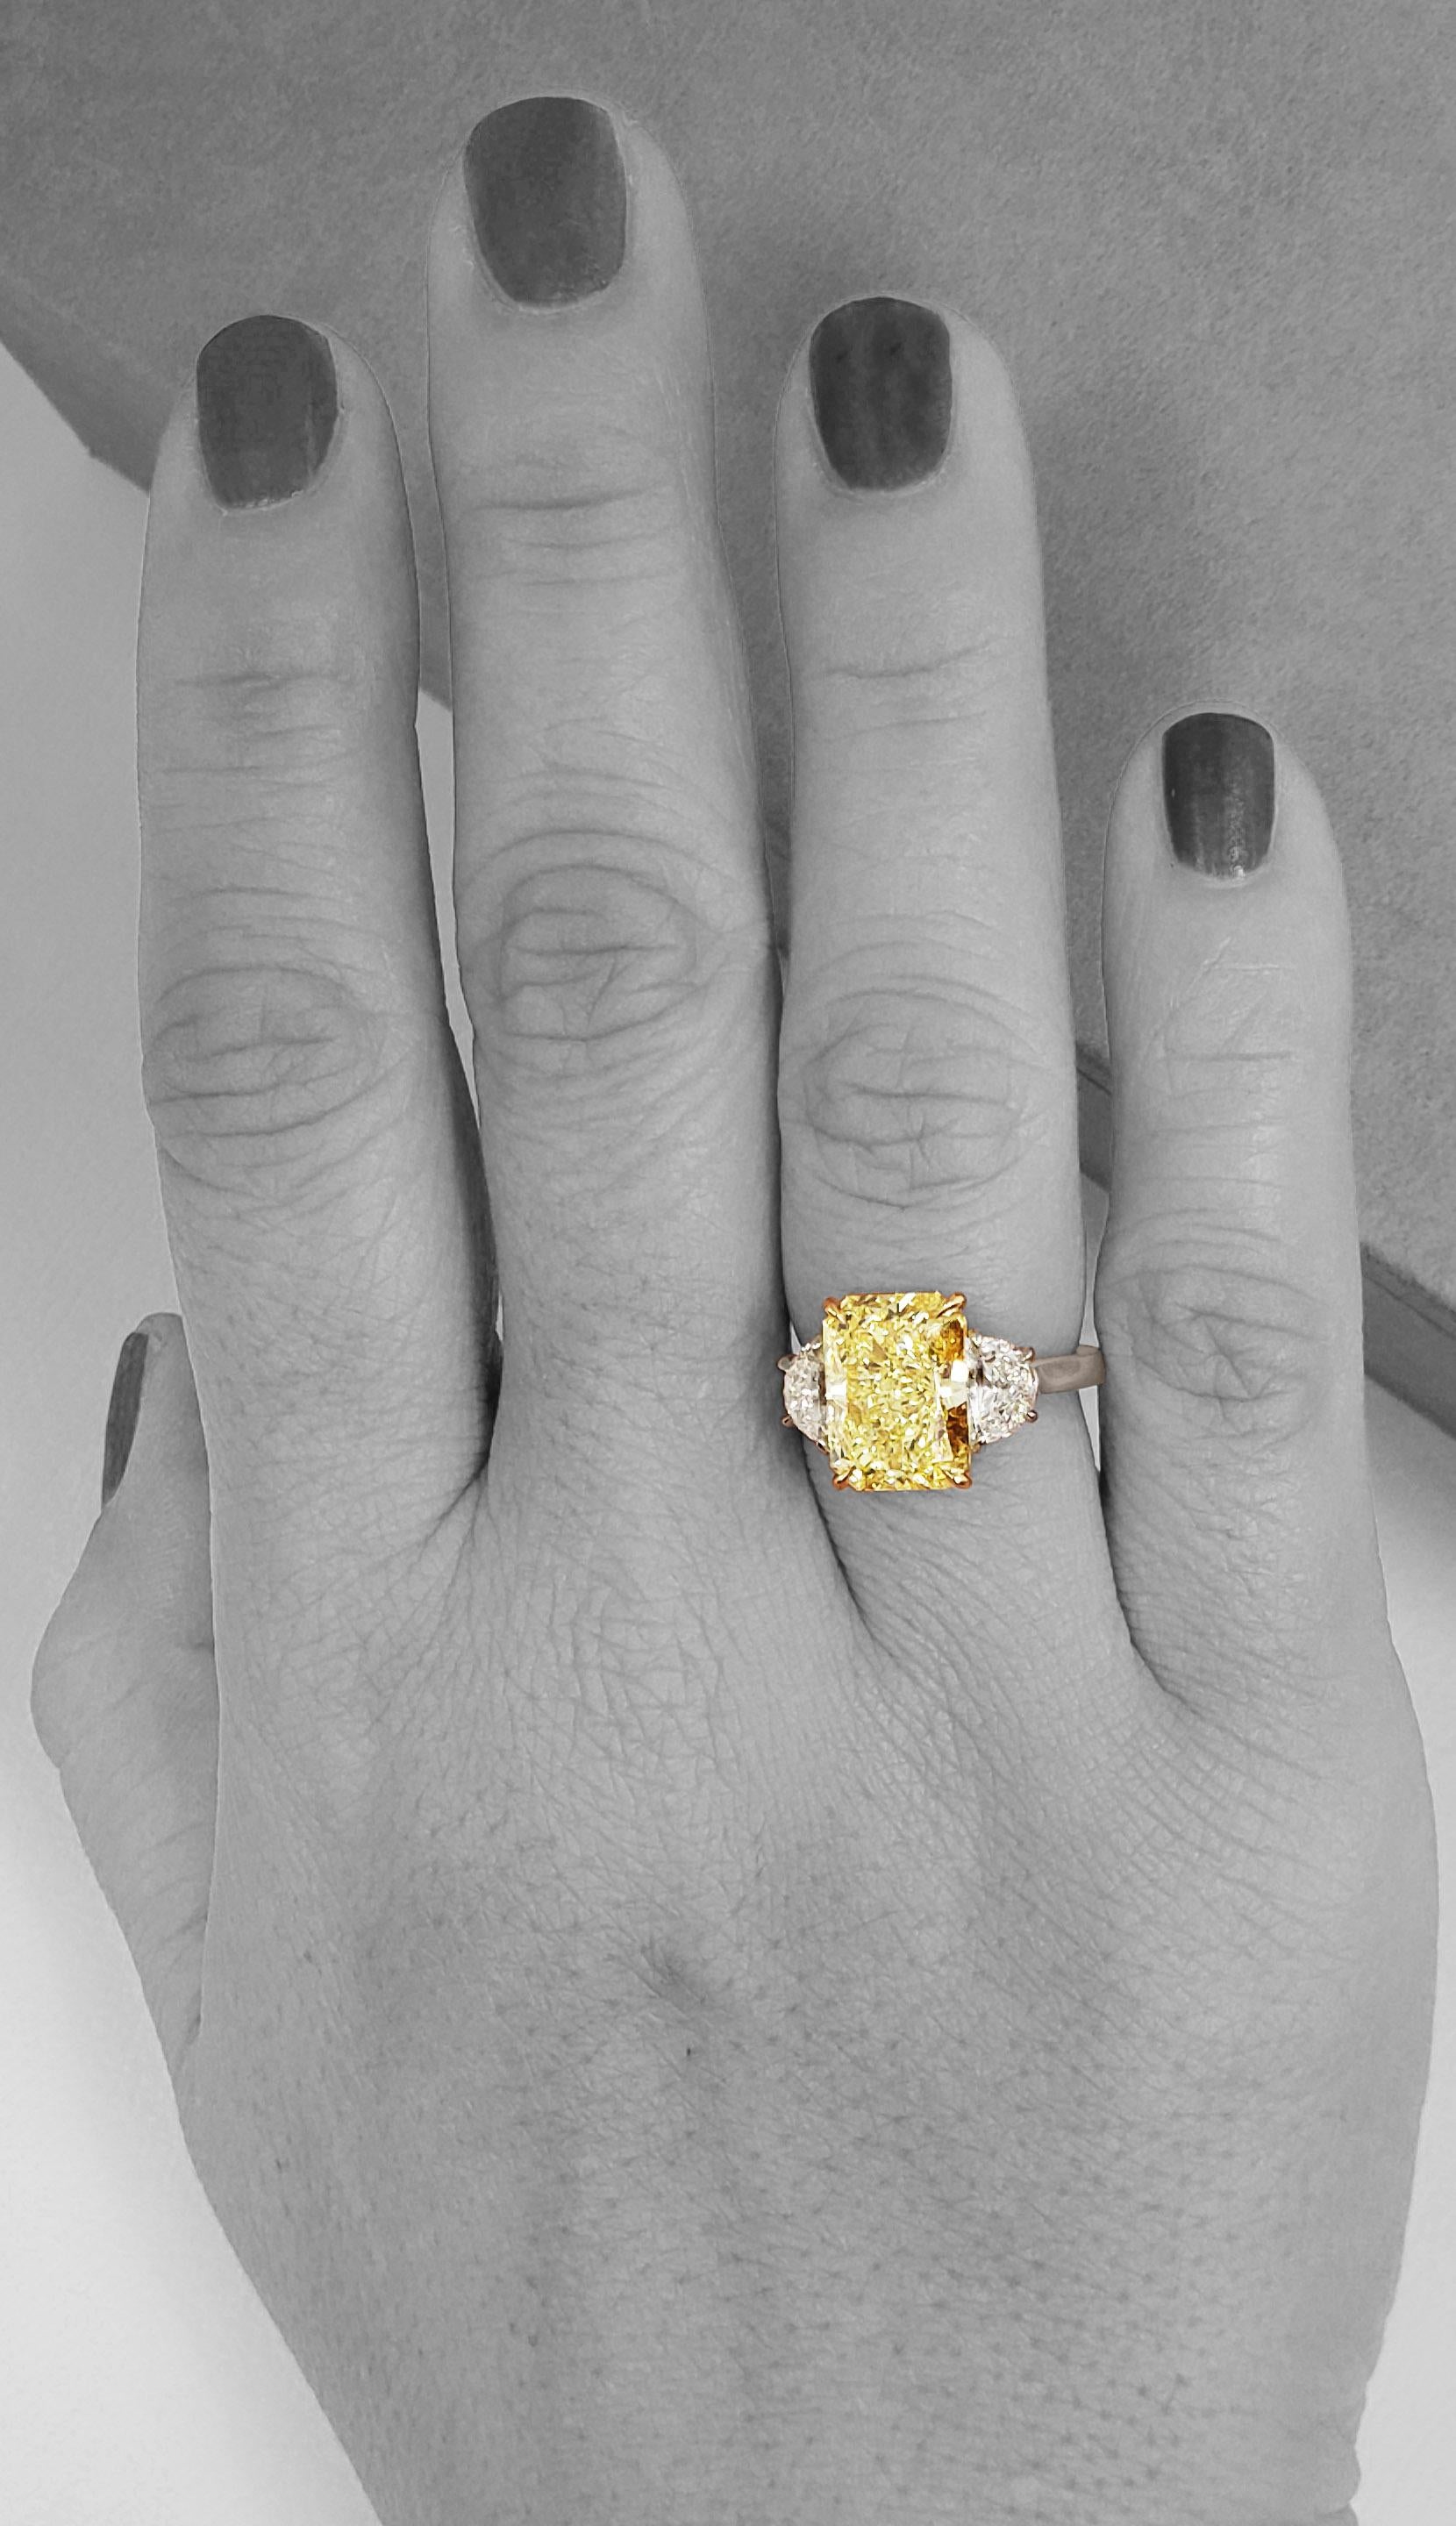 Contemporary Scarselli 5 Carat Fancy Intense Yellow Diamond Ring in Platinum GIA Certified